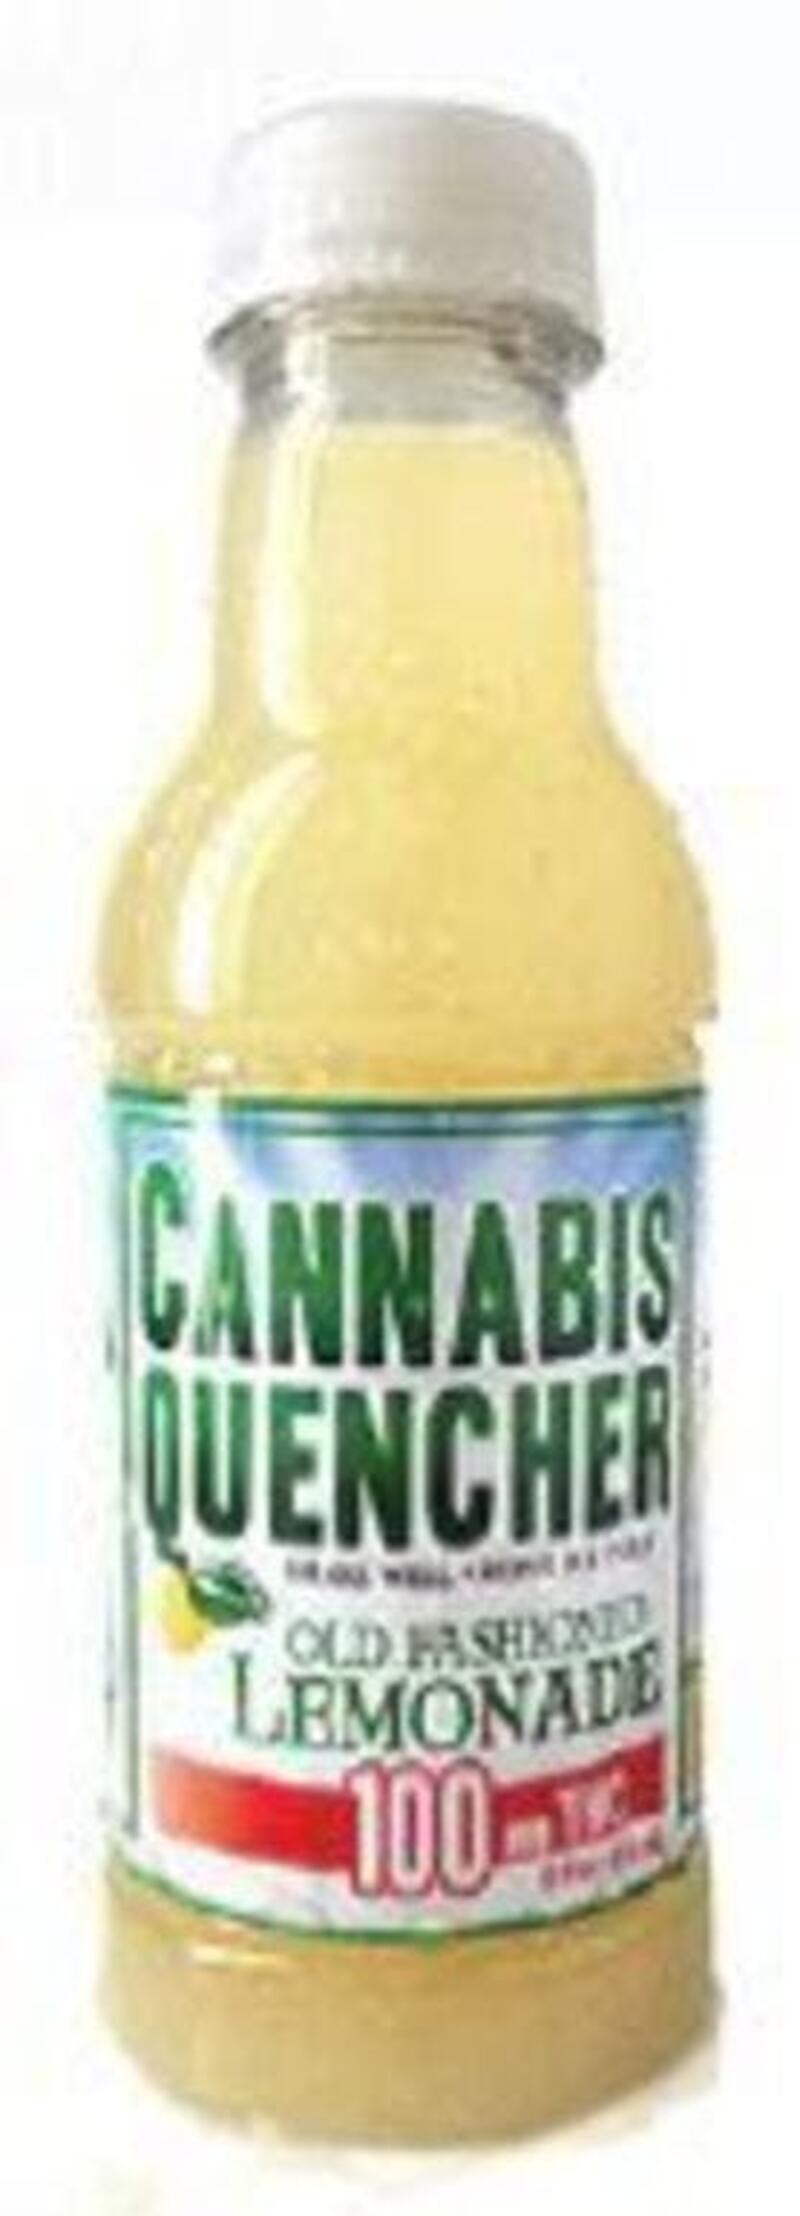 Old Fashioned Lemonade Cannabis Quencher - 100mg